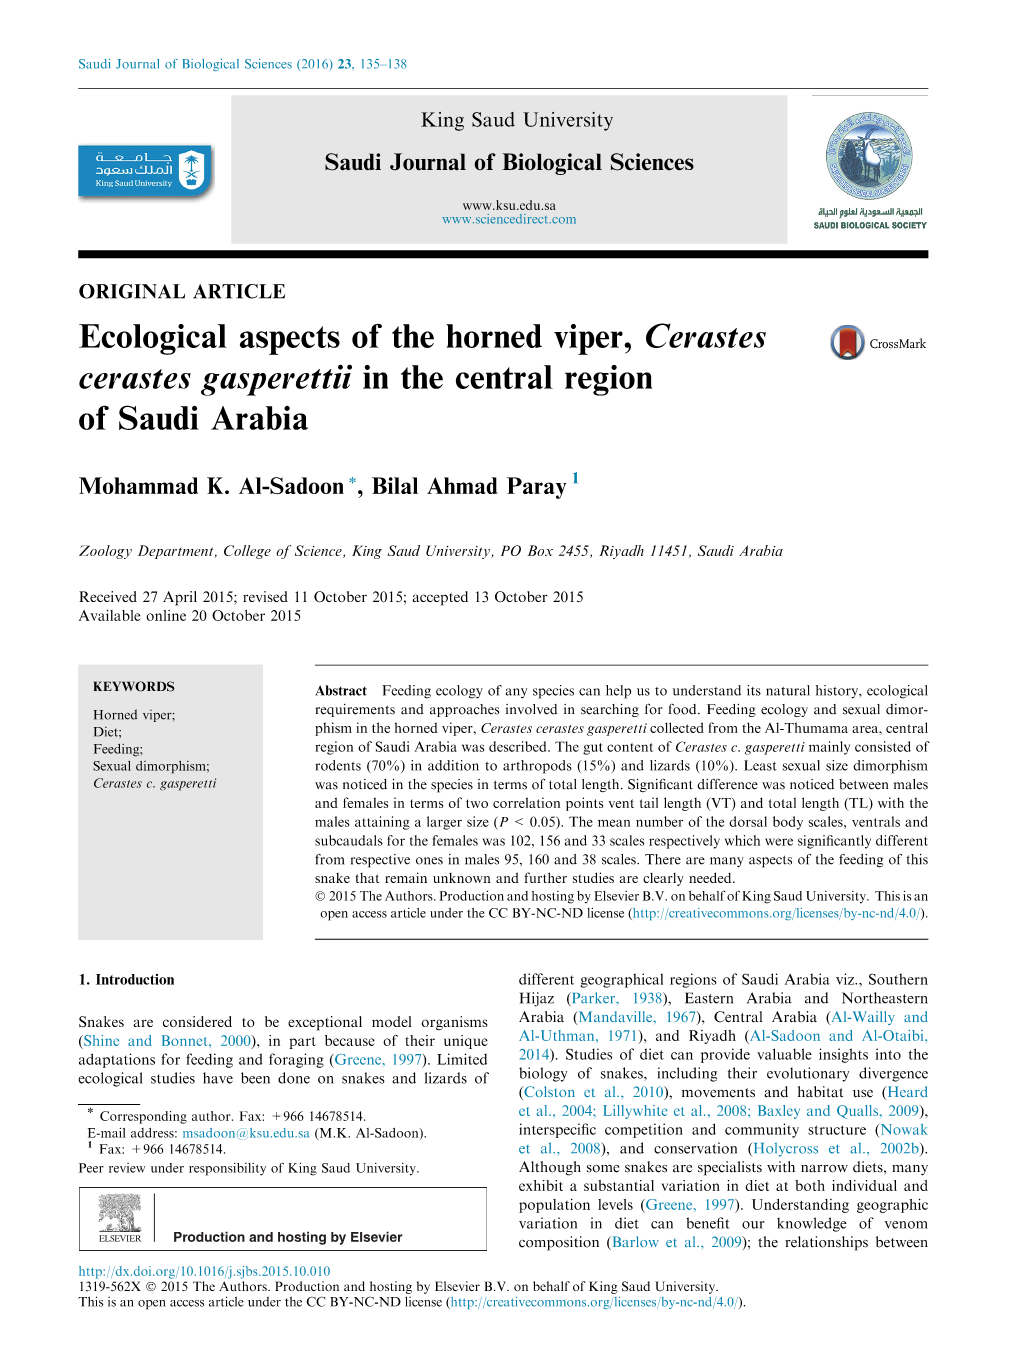 Ecological Aspects of the Horned Viper, Cerastes Cerastes Gasperettii in the Central Region of Saudi Arabia